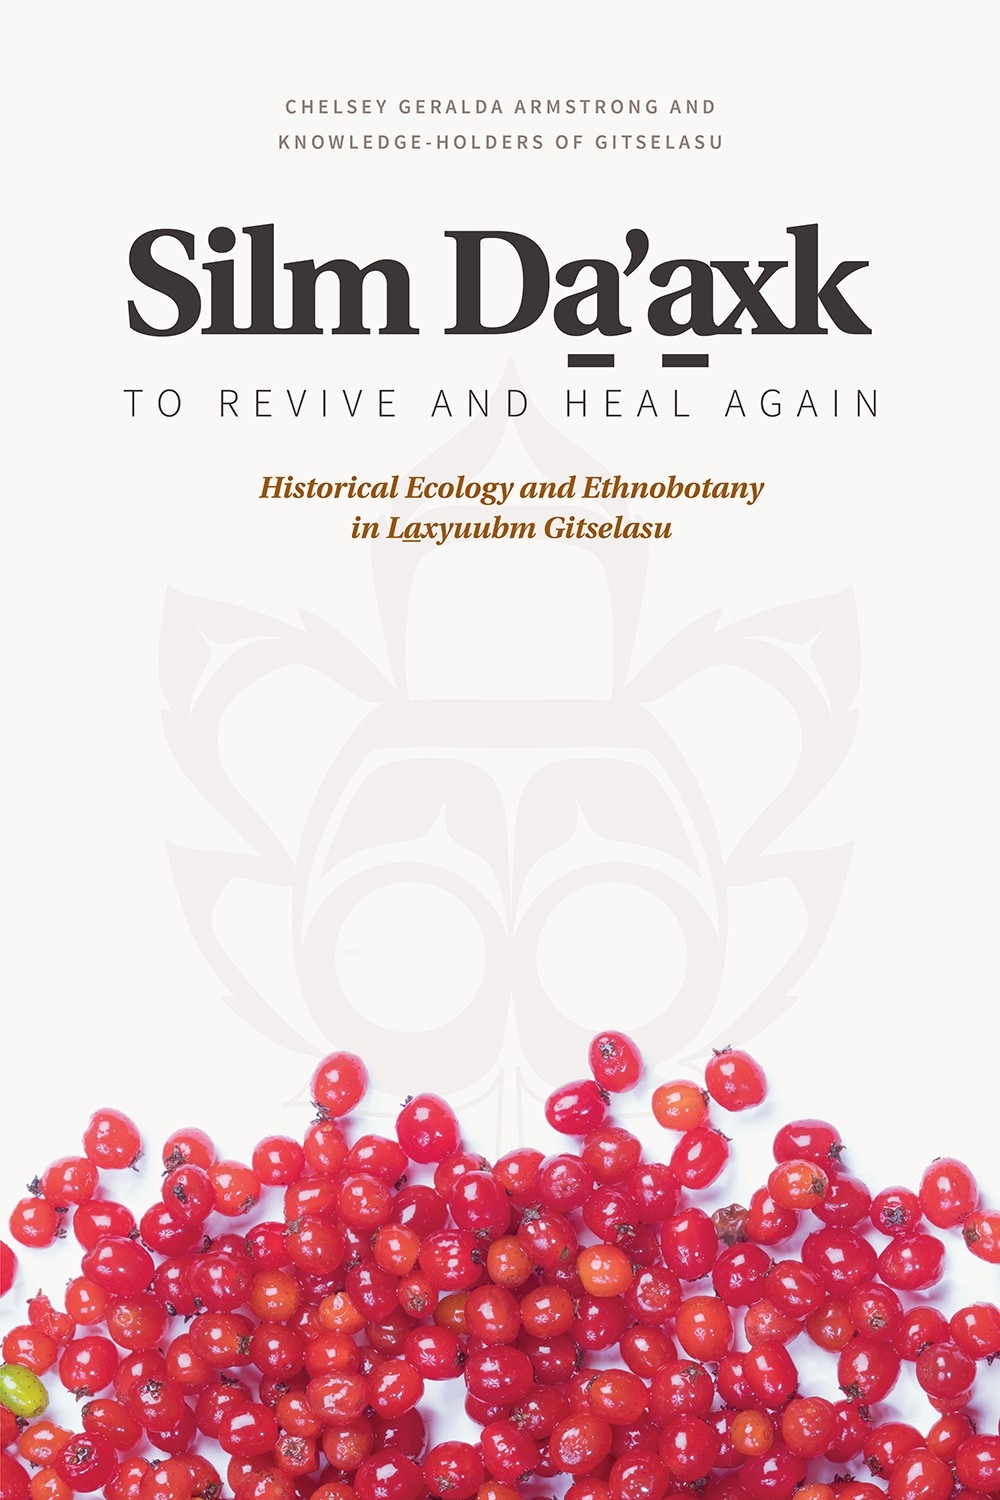 Silm Da’axk (To Revive and Heal Again): Historical Ecology and Ethnobotany in Gitselasu Lahkhyuup by Chelsey Geralda Armstrong